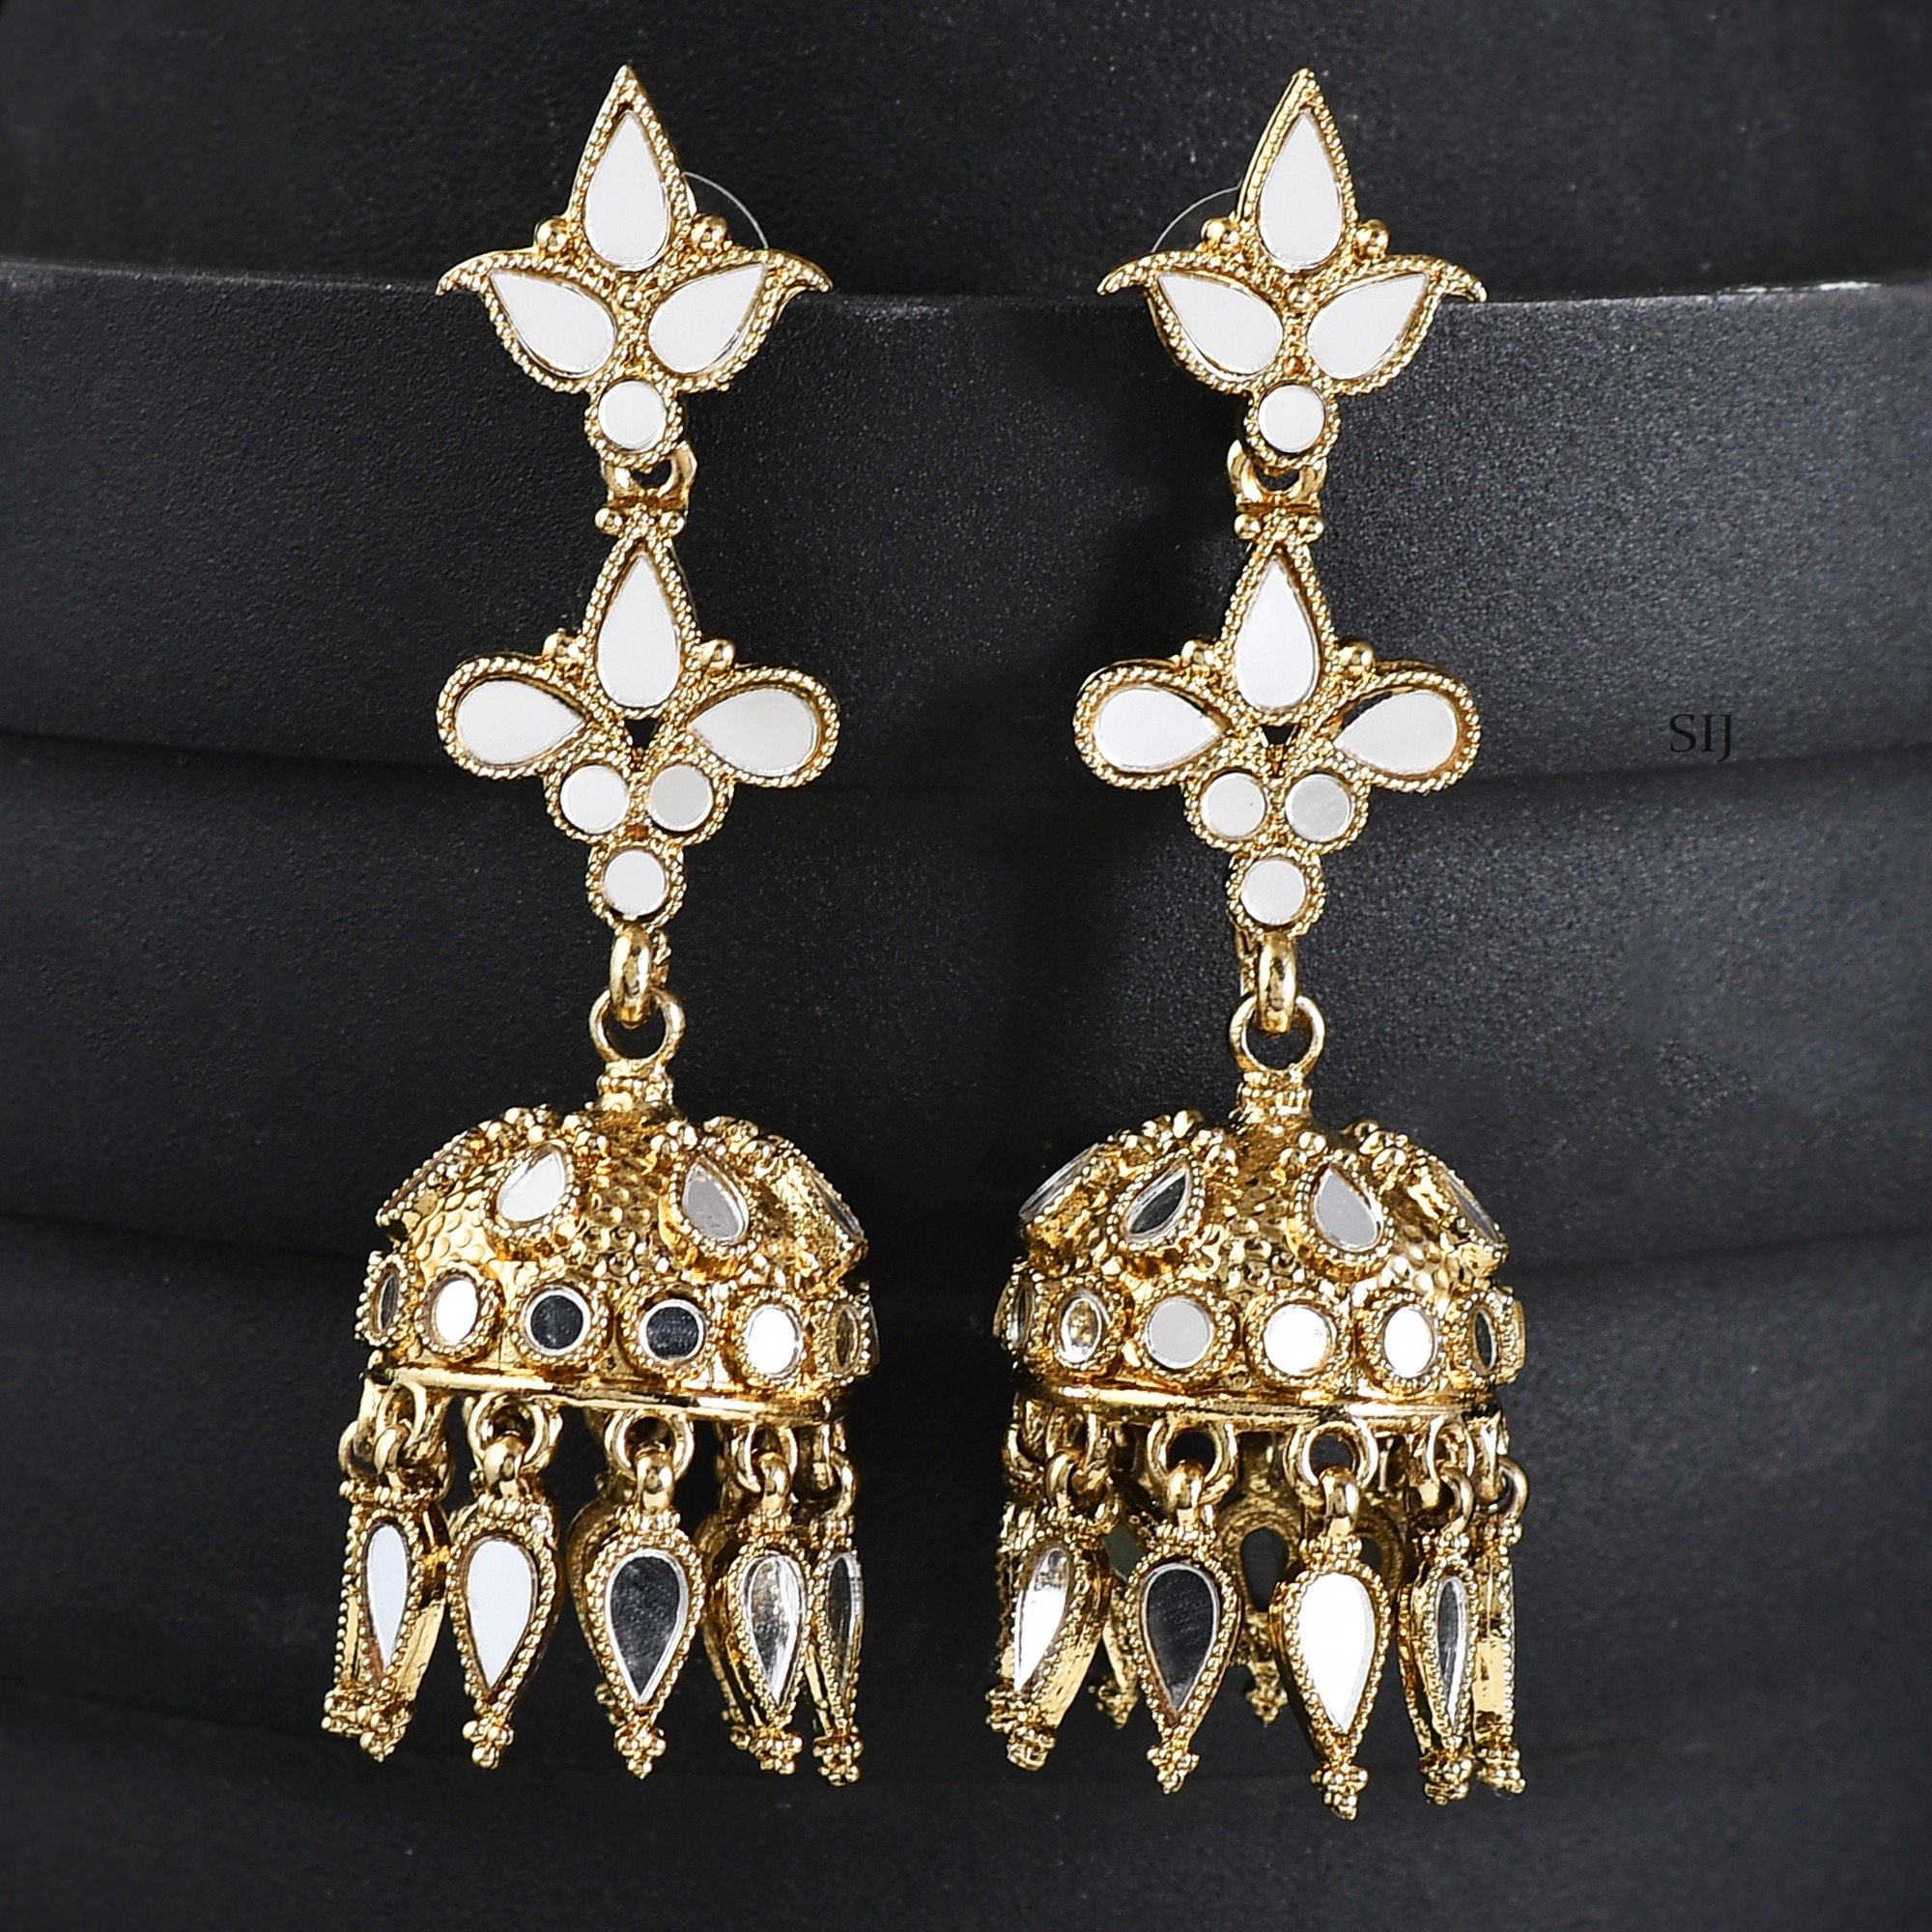 Mirror Studded Drop Earrings with Small Jhumkas Gold